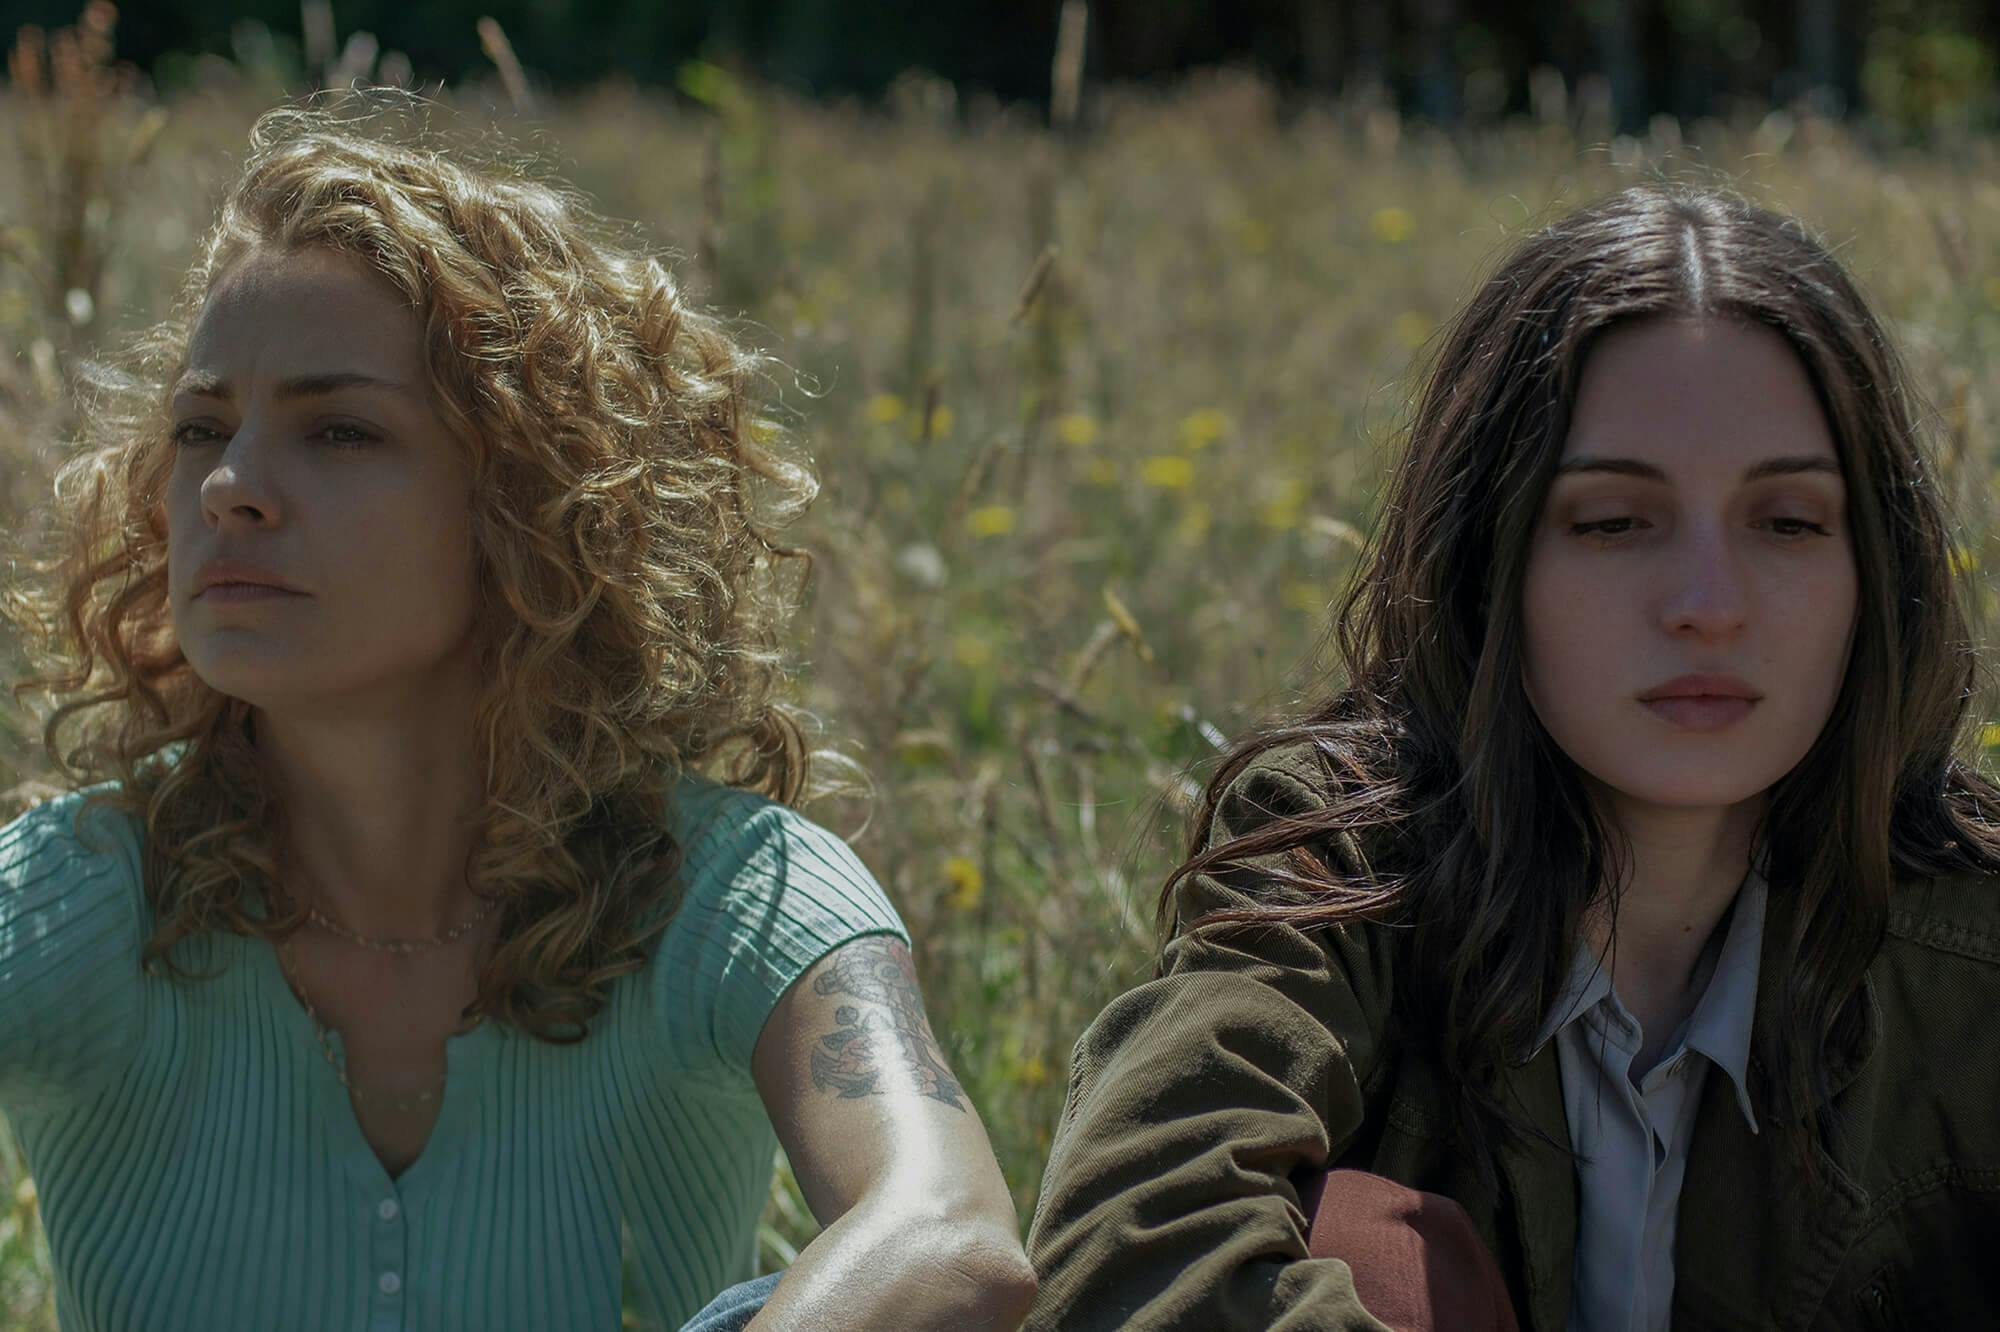 Carola (Dolores Fonzi) and Amanda (María Valverde) sit in a field of wildflowers and grass. Carola wears a turquoise buttoned-down shirt and Amanda wears a dark jacket.